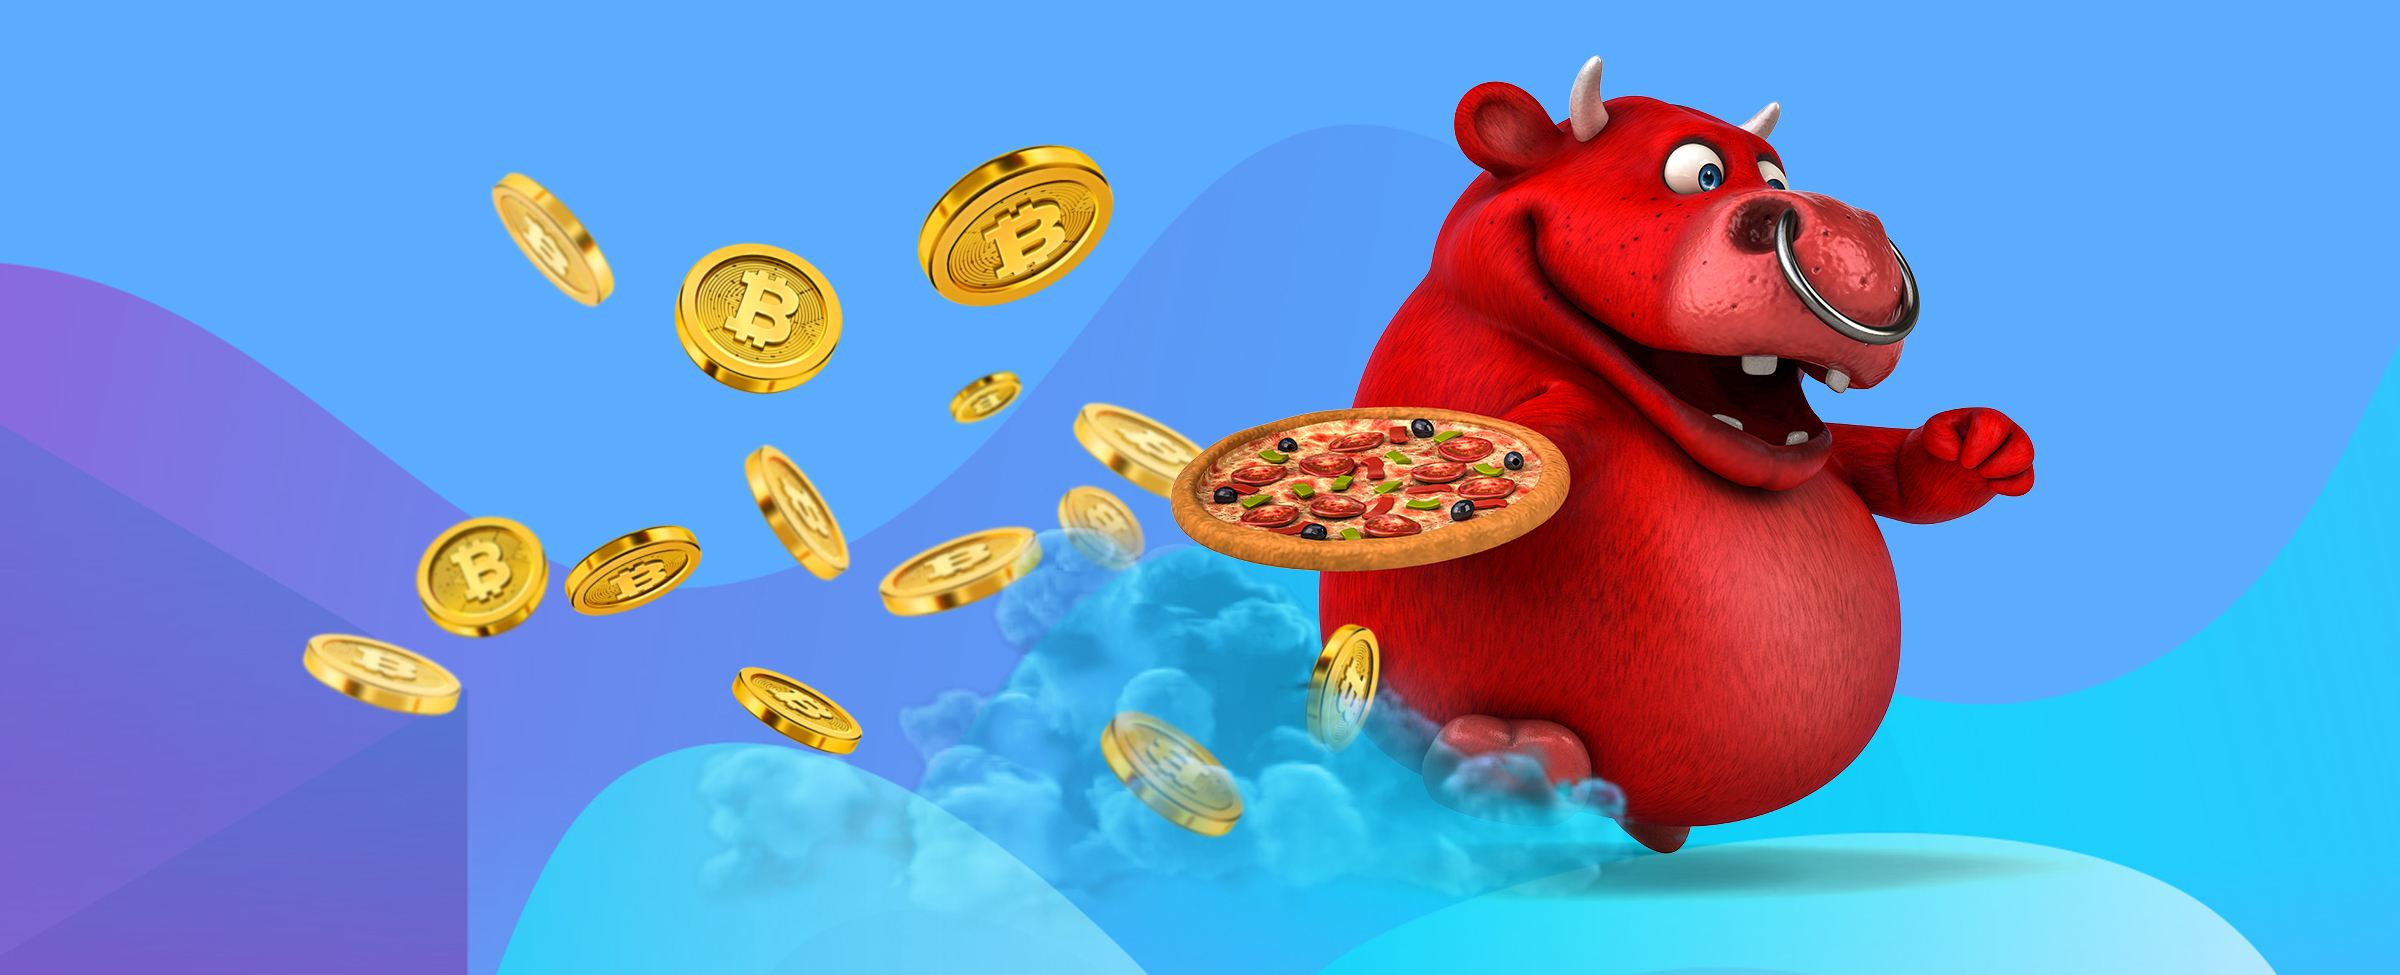 Fun fact: the first ever Bitcoin transaction was for pizza. Yes, PIZZA! Read about it here.